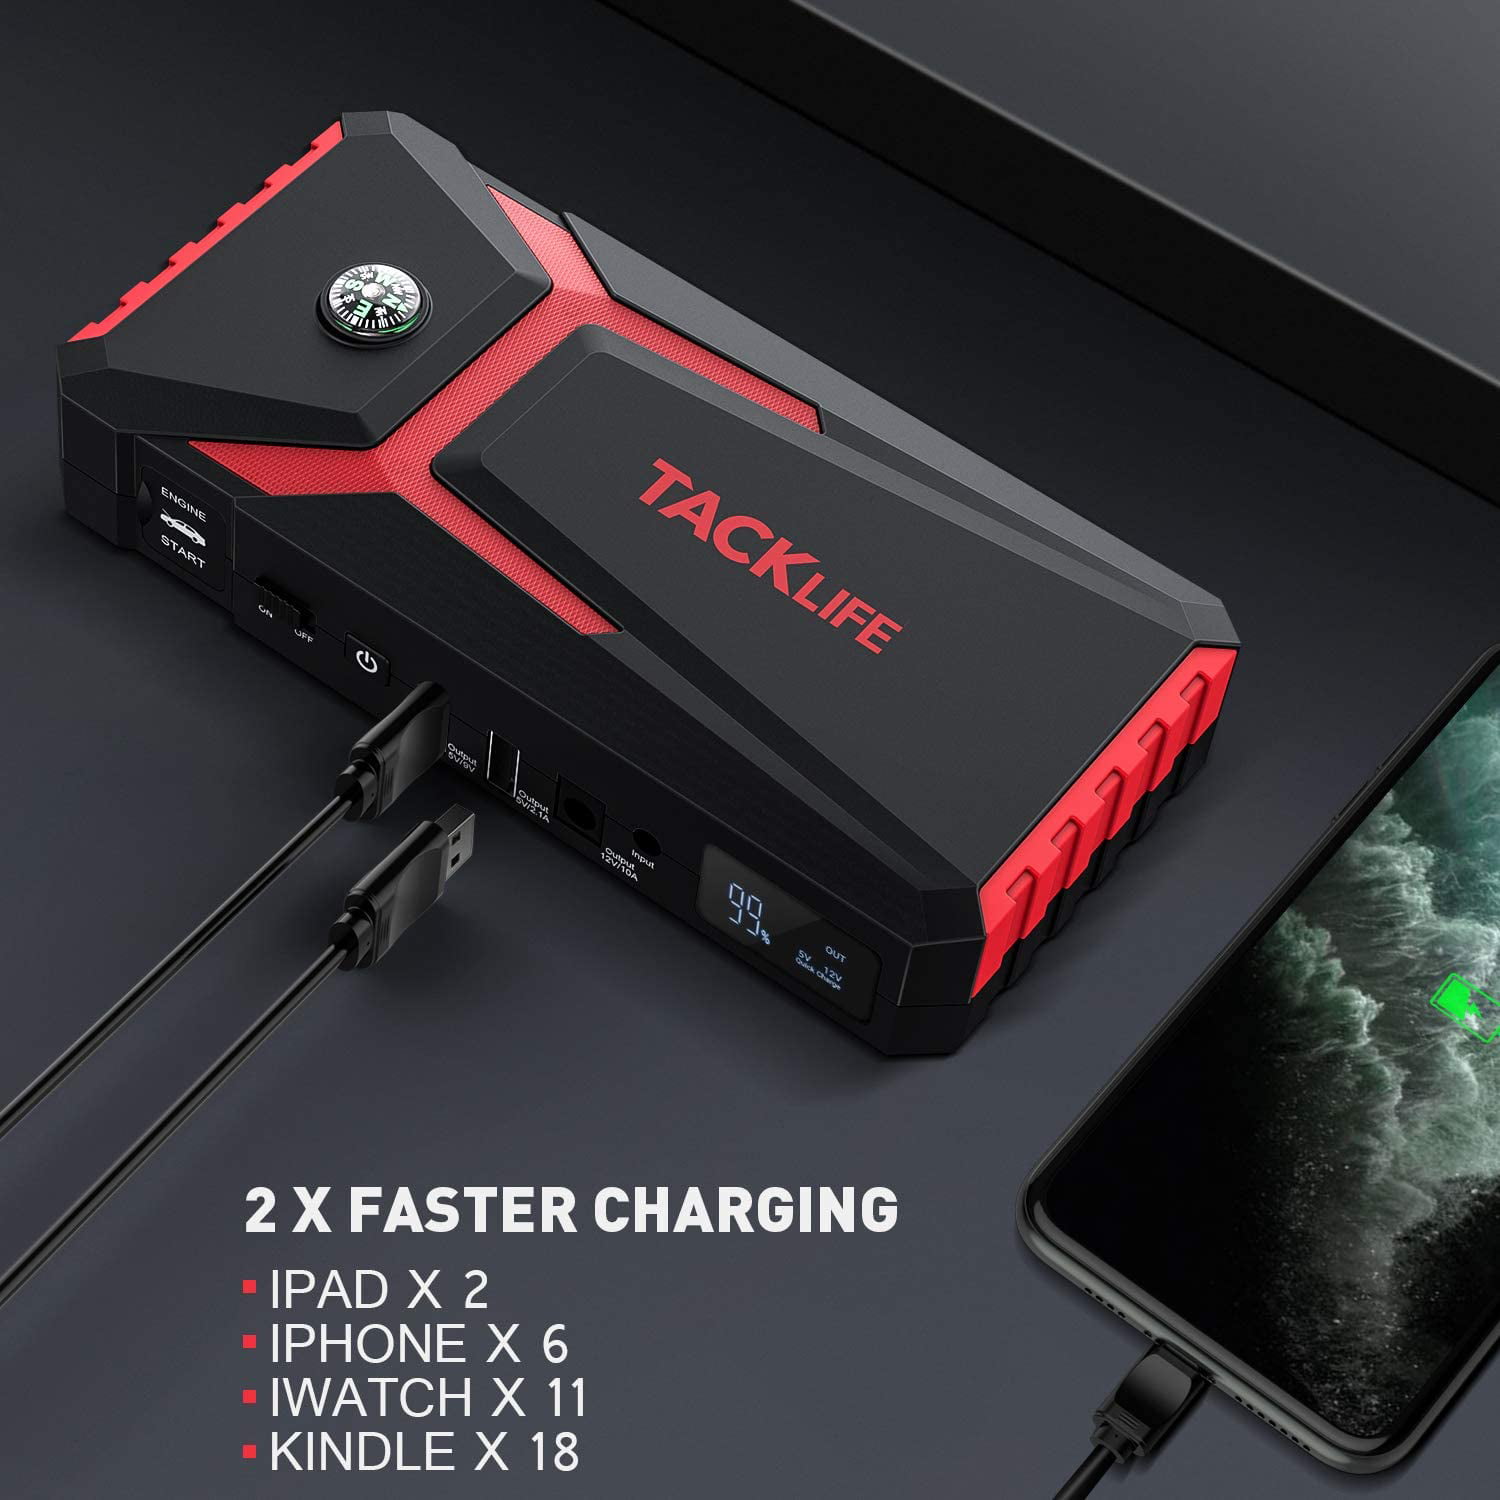 PriceWatcher - TACKLIFE T8 Booster Batterie-18000mAh/800A Booster Batterie  Voiture Mo